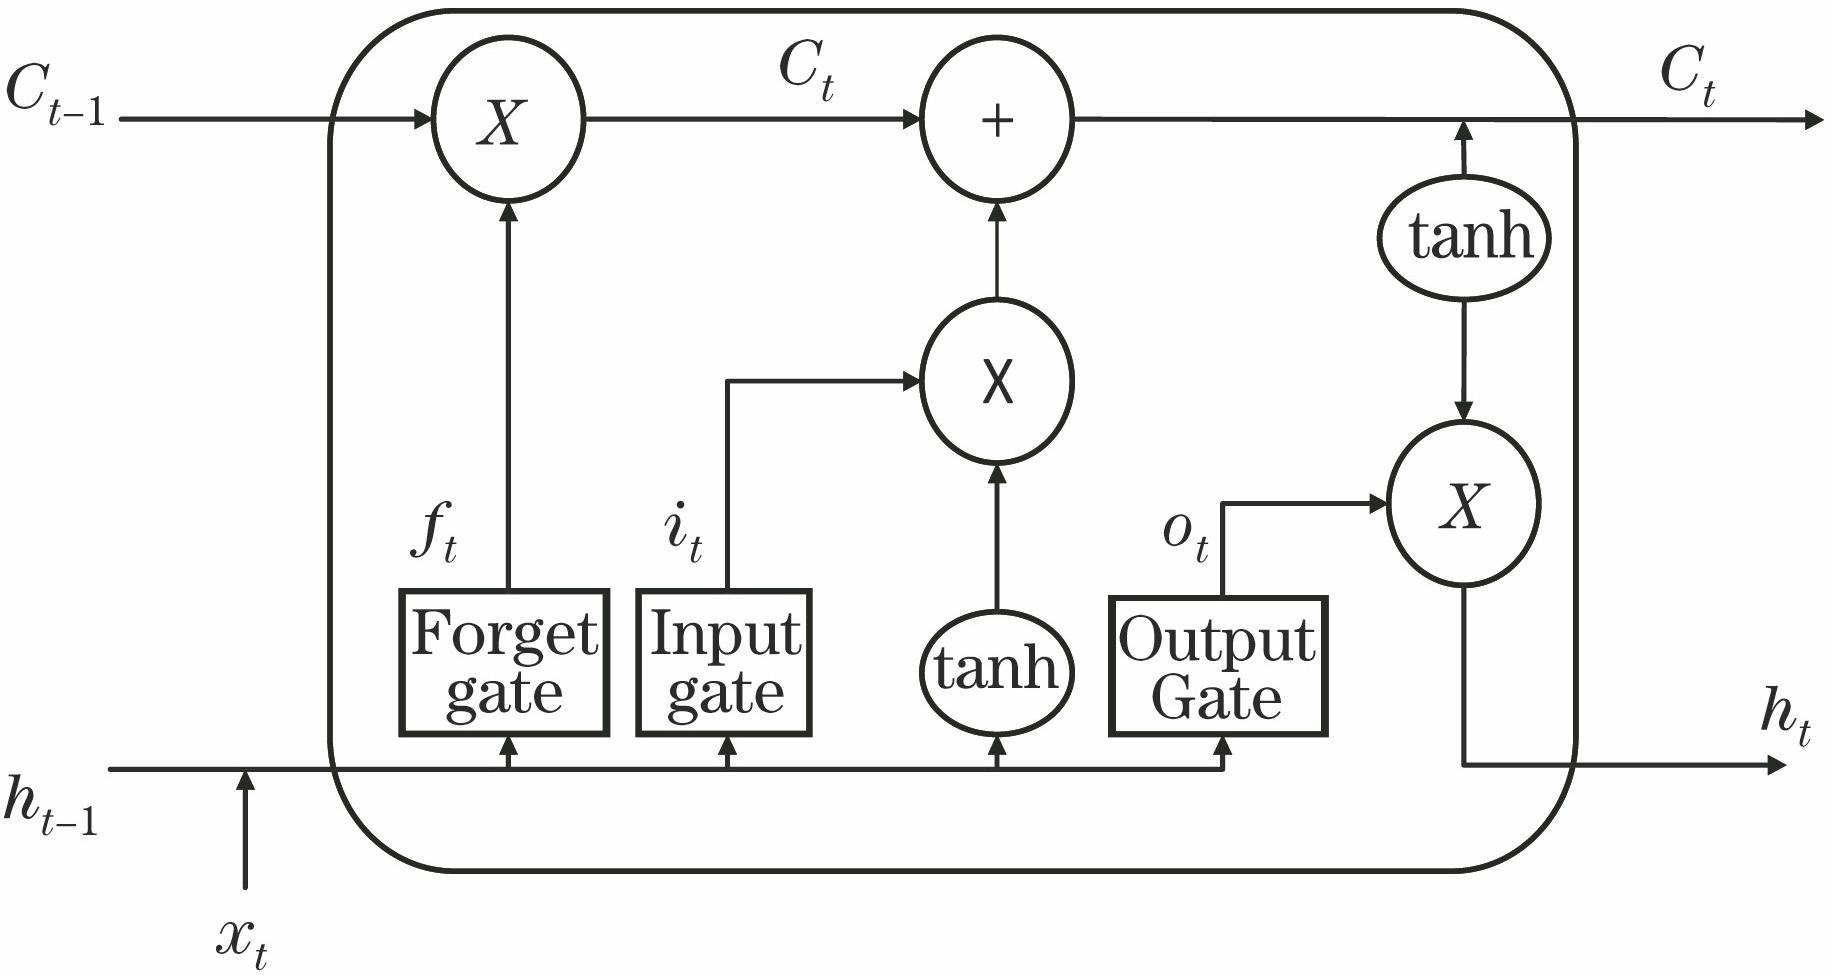 LSTM neural network model assisted FSO system model for polarization code decoding